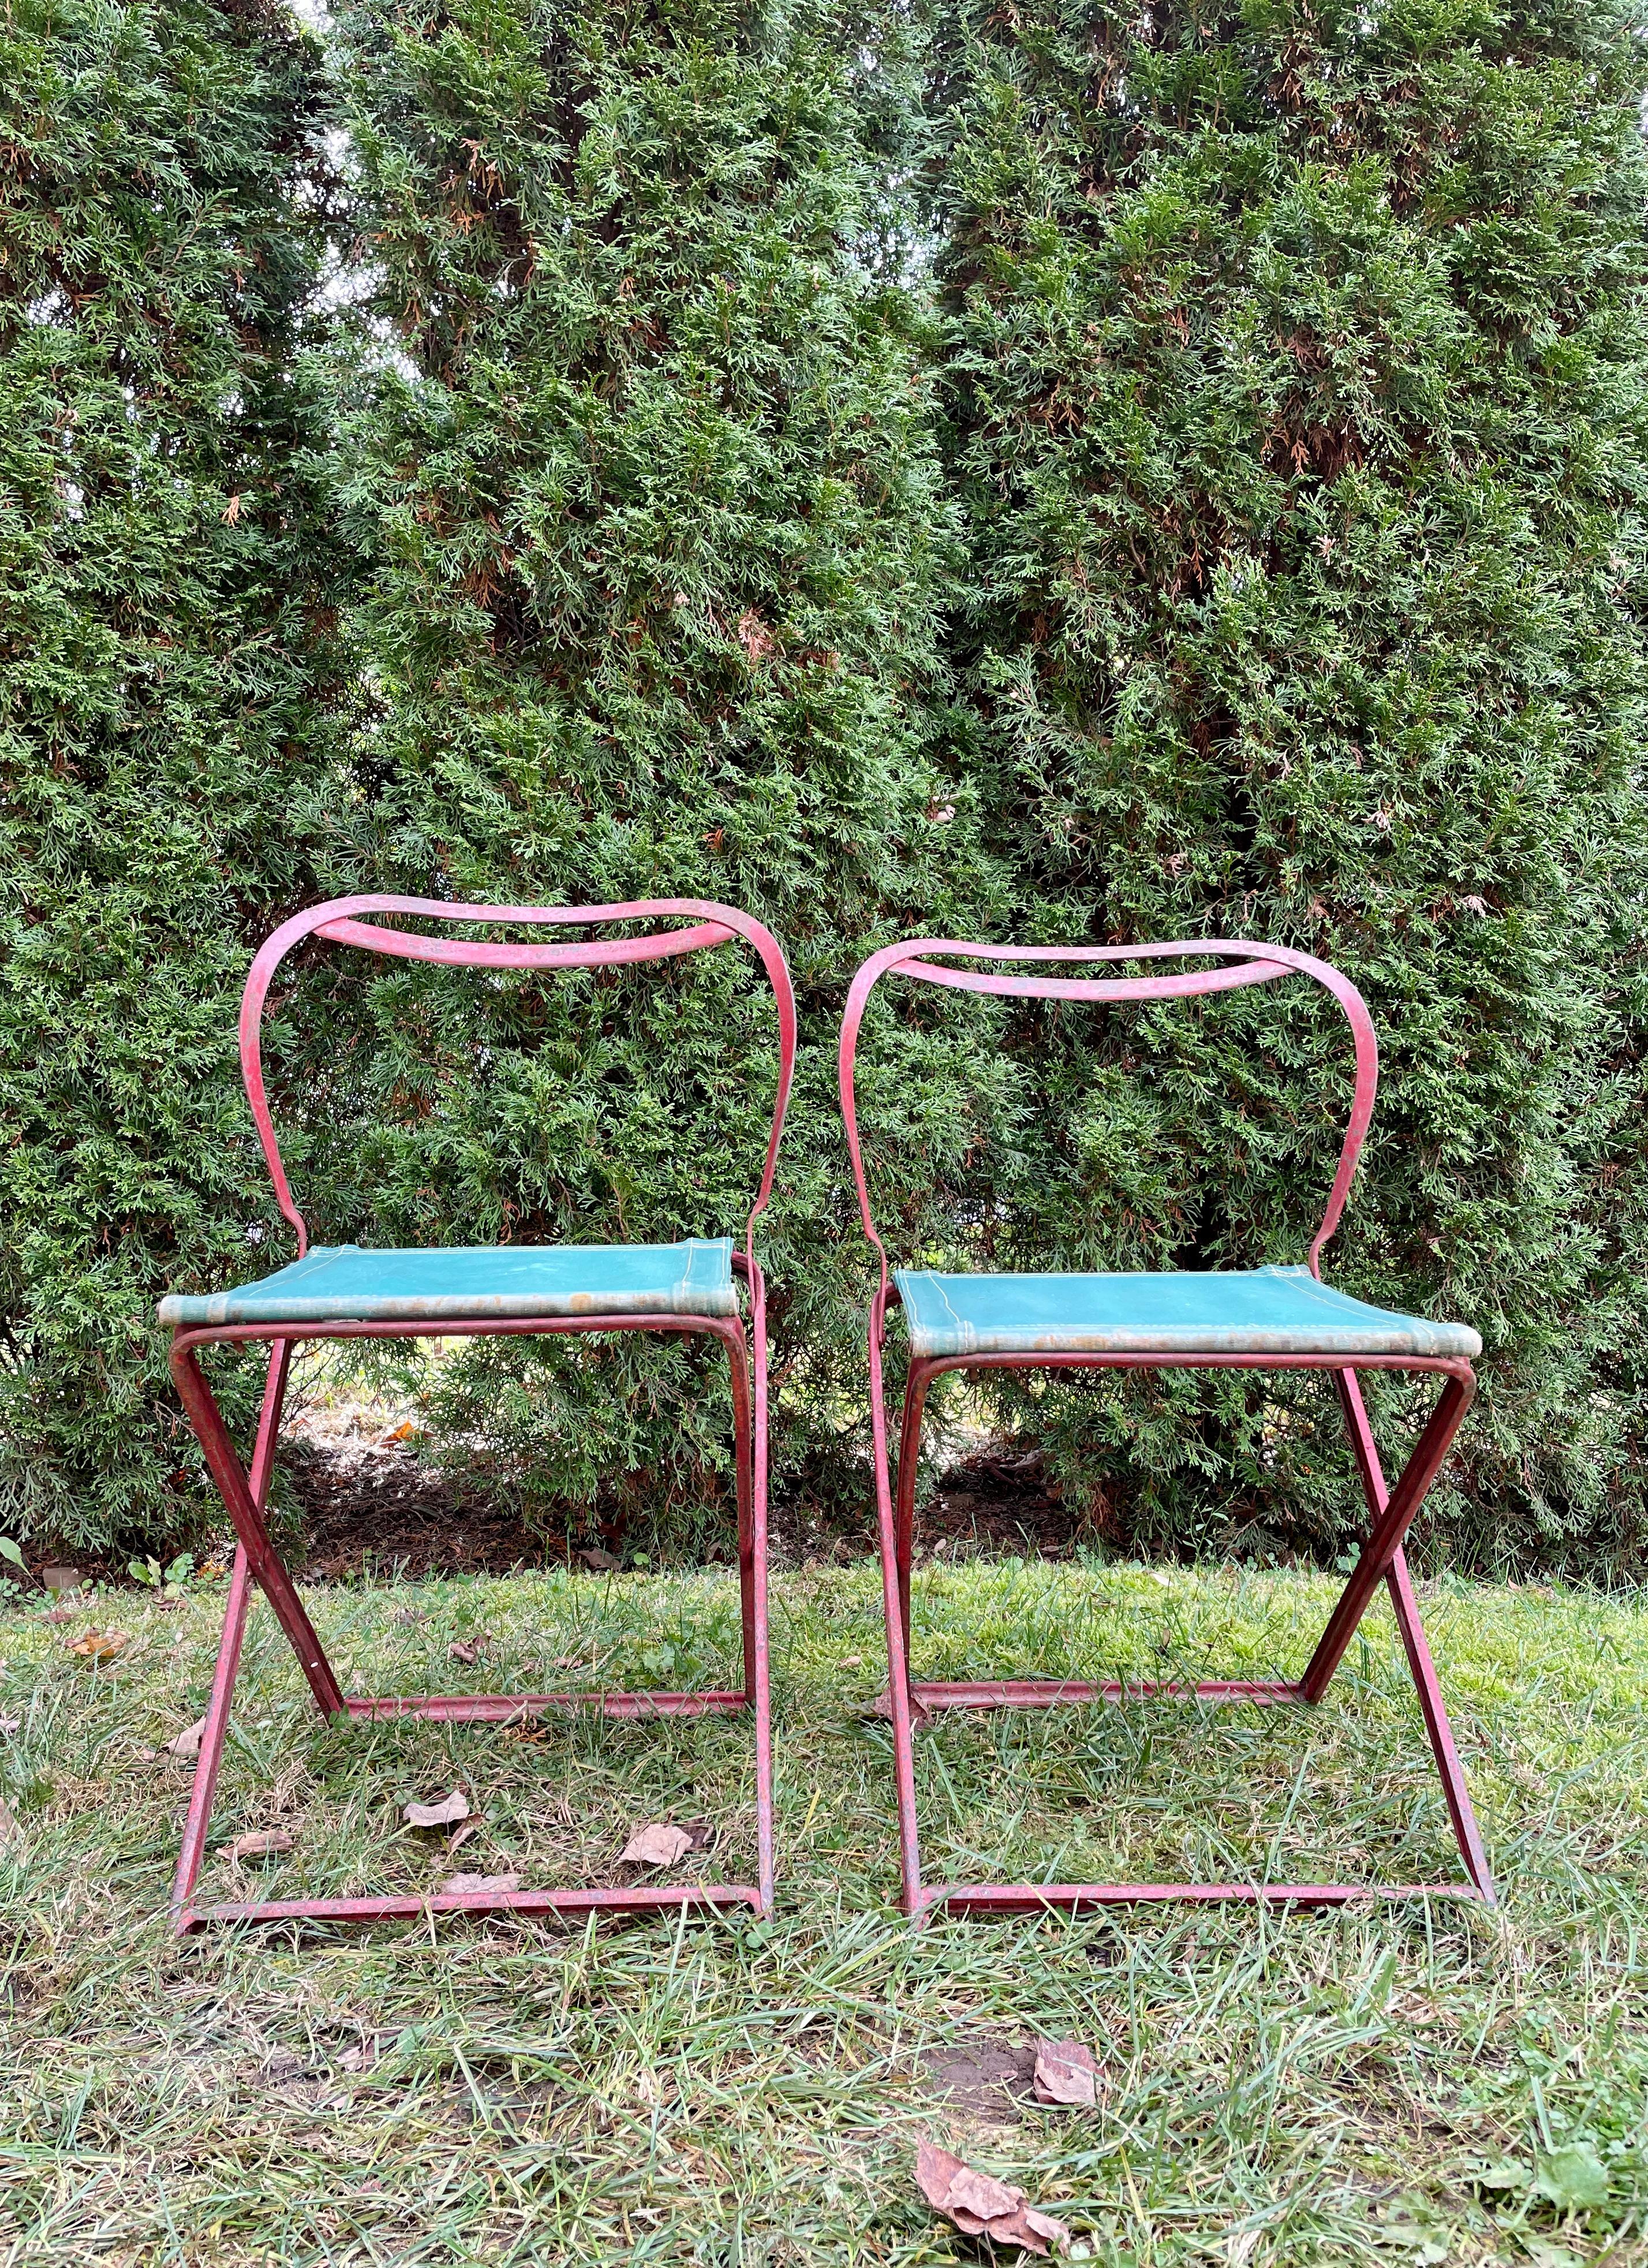 Never in all our decades of dealing have we seen chairs like these! Clearly French Deco and featuring older (possibly original) green canvas seats, these red-painted wrought iron chairs fold in three positions including a stool configuration.